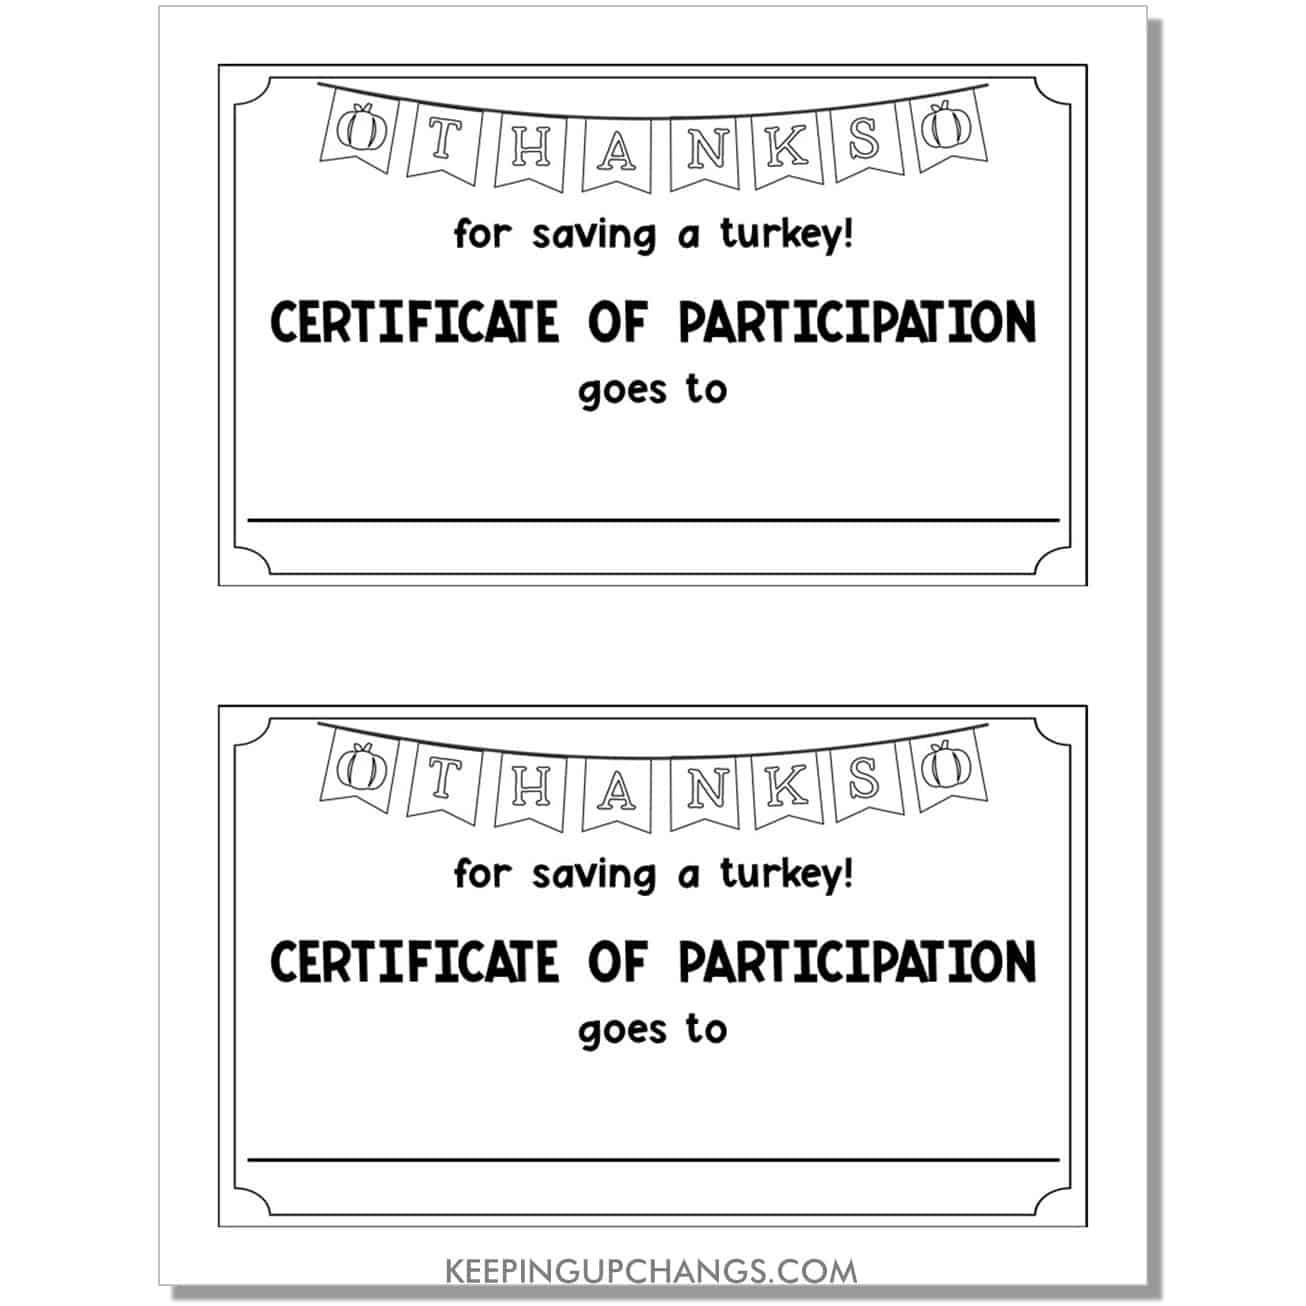 hide tom turkey disguise certificate of participation.